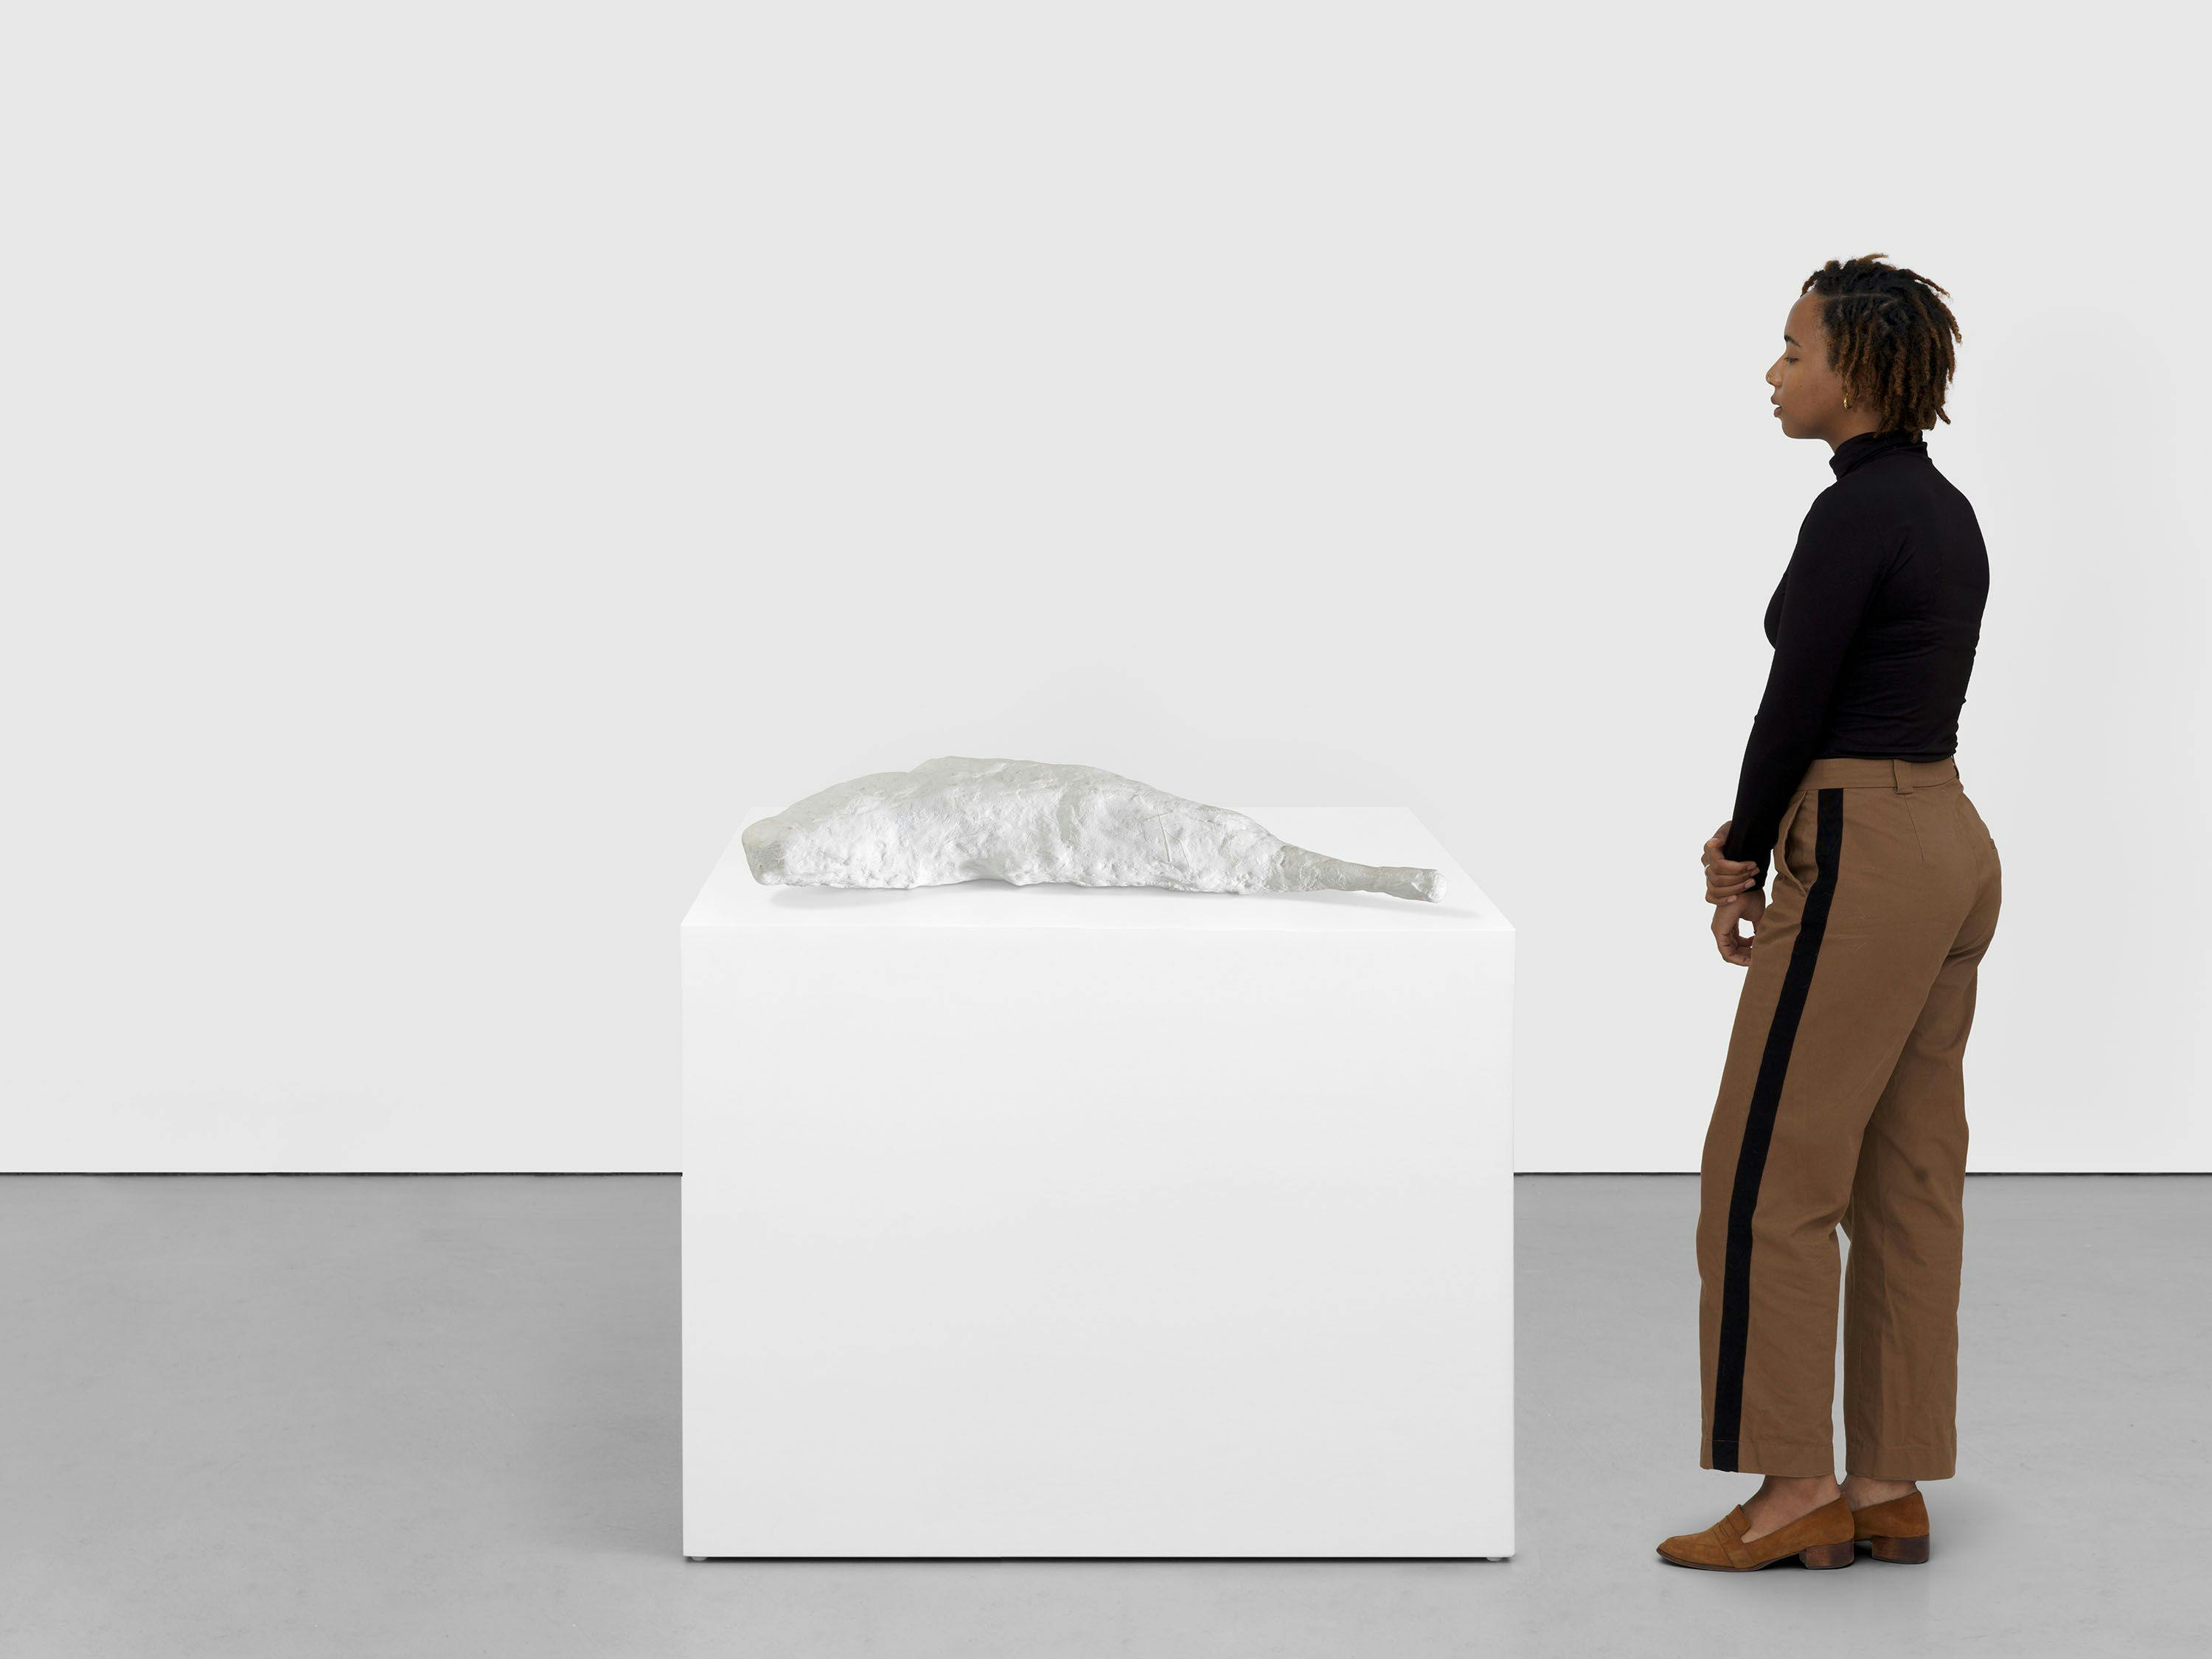 An untitled sculpture by Franz West, dated 1989.